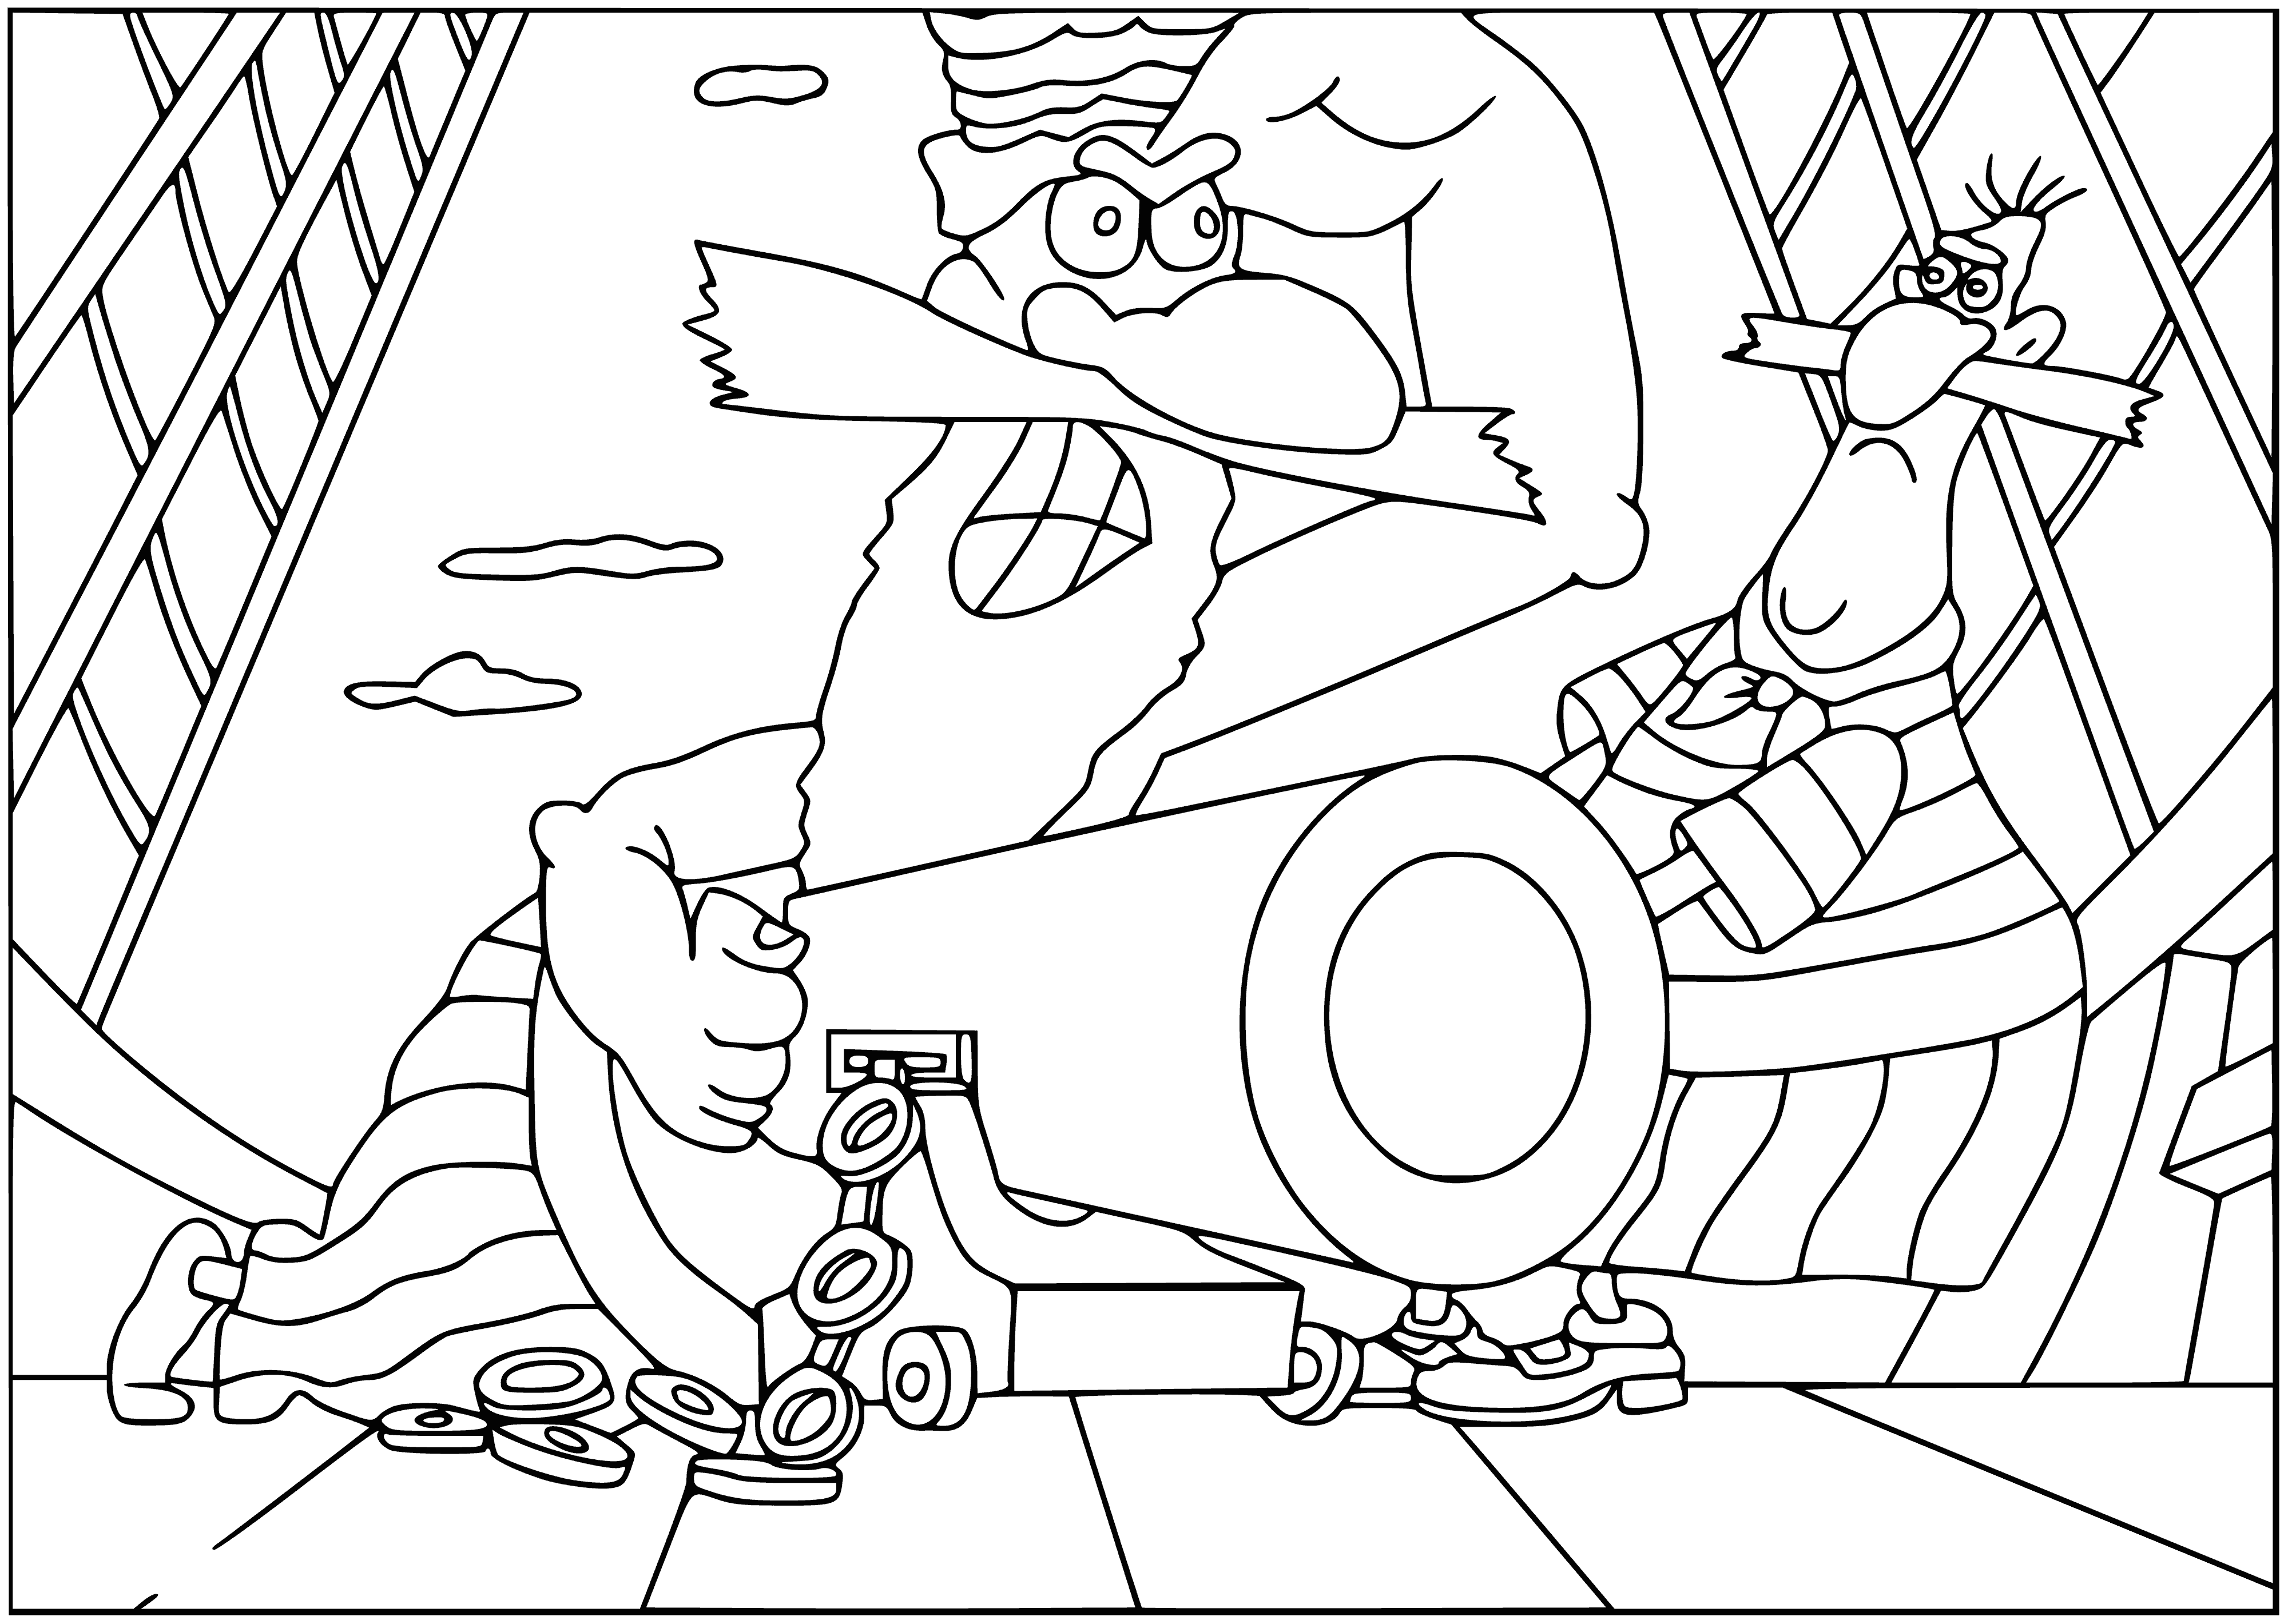 coloring page: Pirates are on a beach near an island with their ships, swords, pistols, maps & compasses. A skull & bones flag flies from one ship.